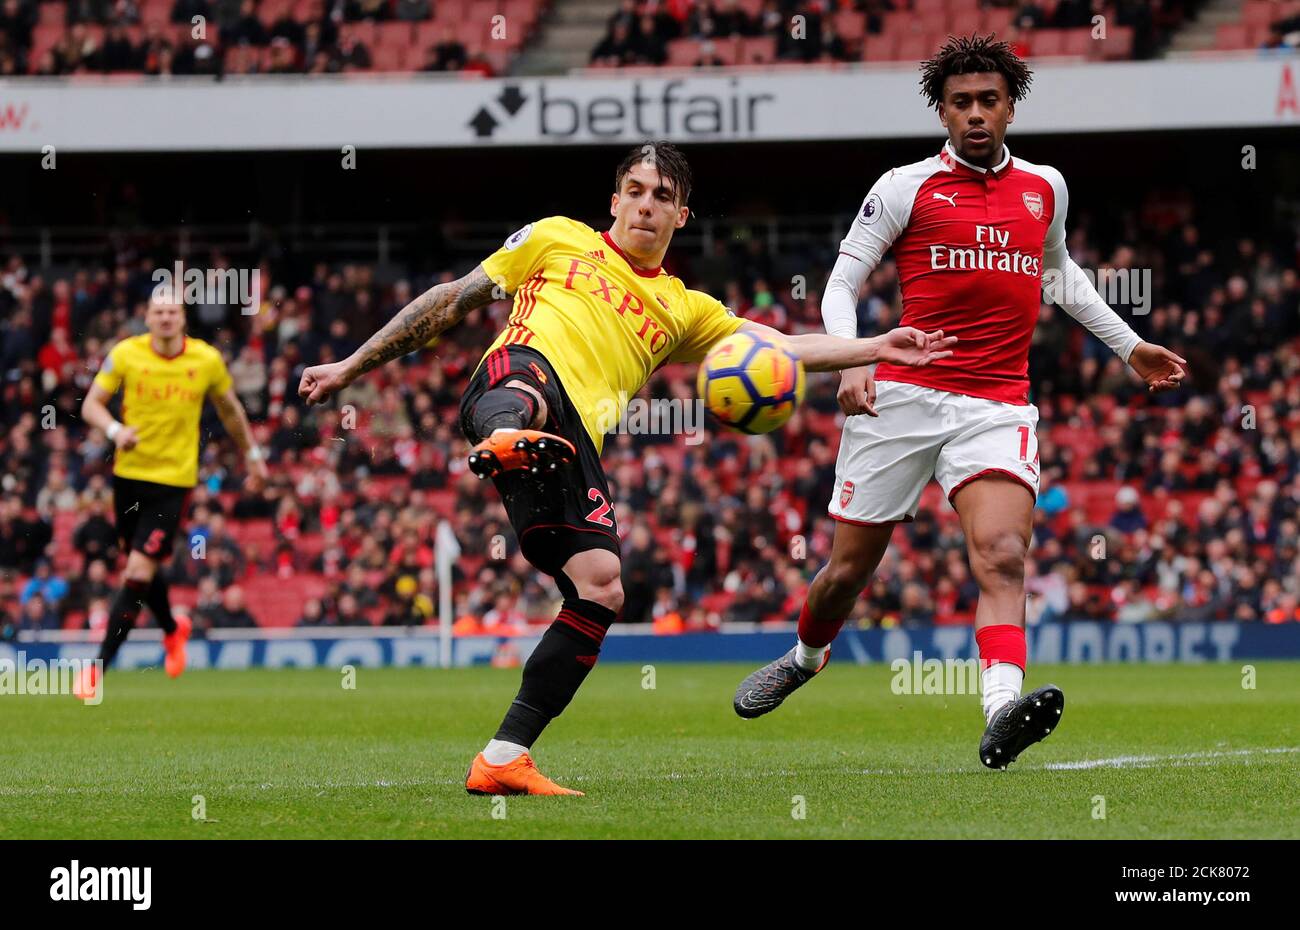 Soccer Football - Premier League - Arsenal vs Watford - Emirates Stadium, London, Britain - March 11, 2018   Watford's Kiko Femenia in action     REUTERS/Eddie Keogh    EDITORIAL USE ONLY. No use with unauthorized audio, video, data, fixture lists, club/league logos or "live" services. Online in-match use limited to 75 images, no video emulation. No use in betting, games or single club/league/player publications.  Please contact your account representative for further details. Stock Photo